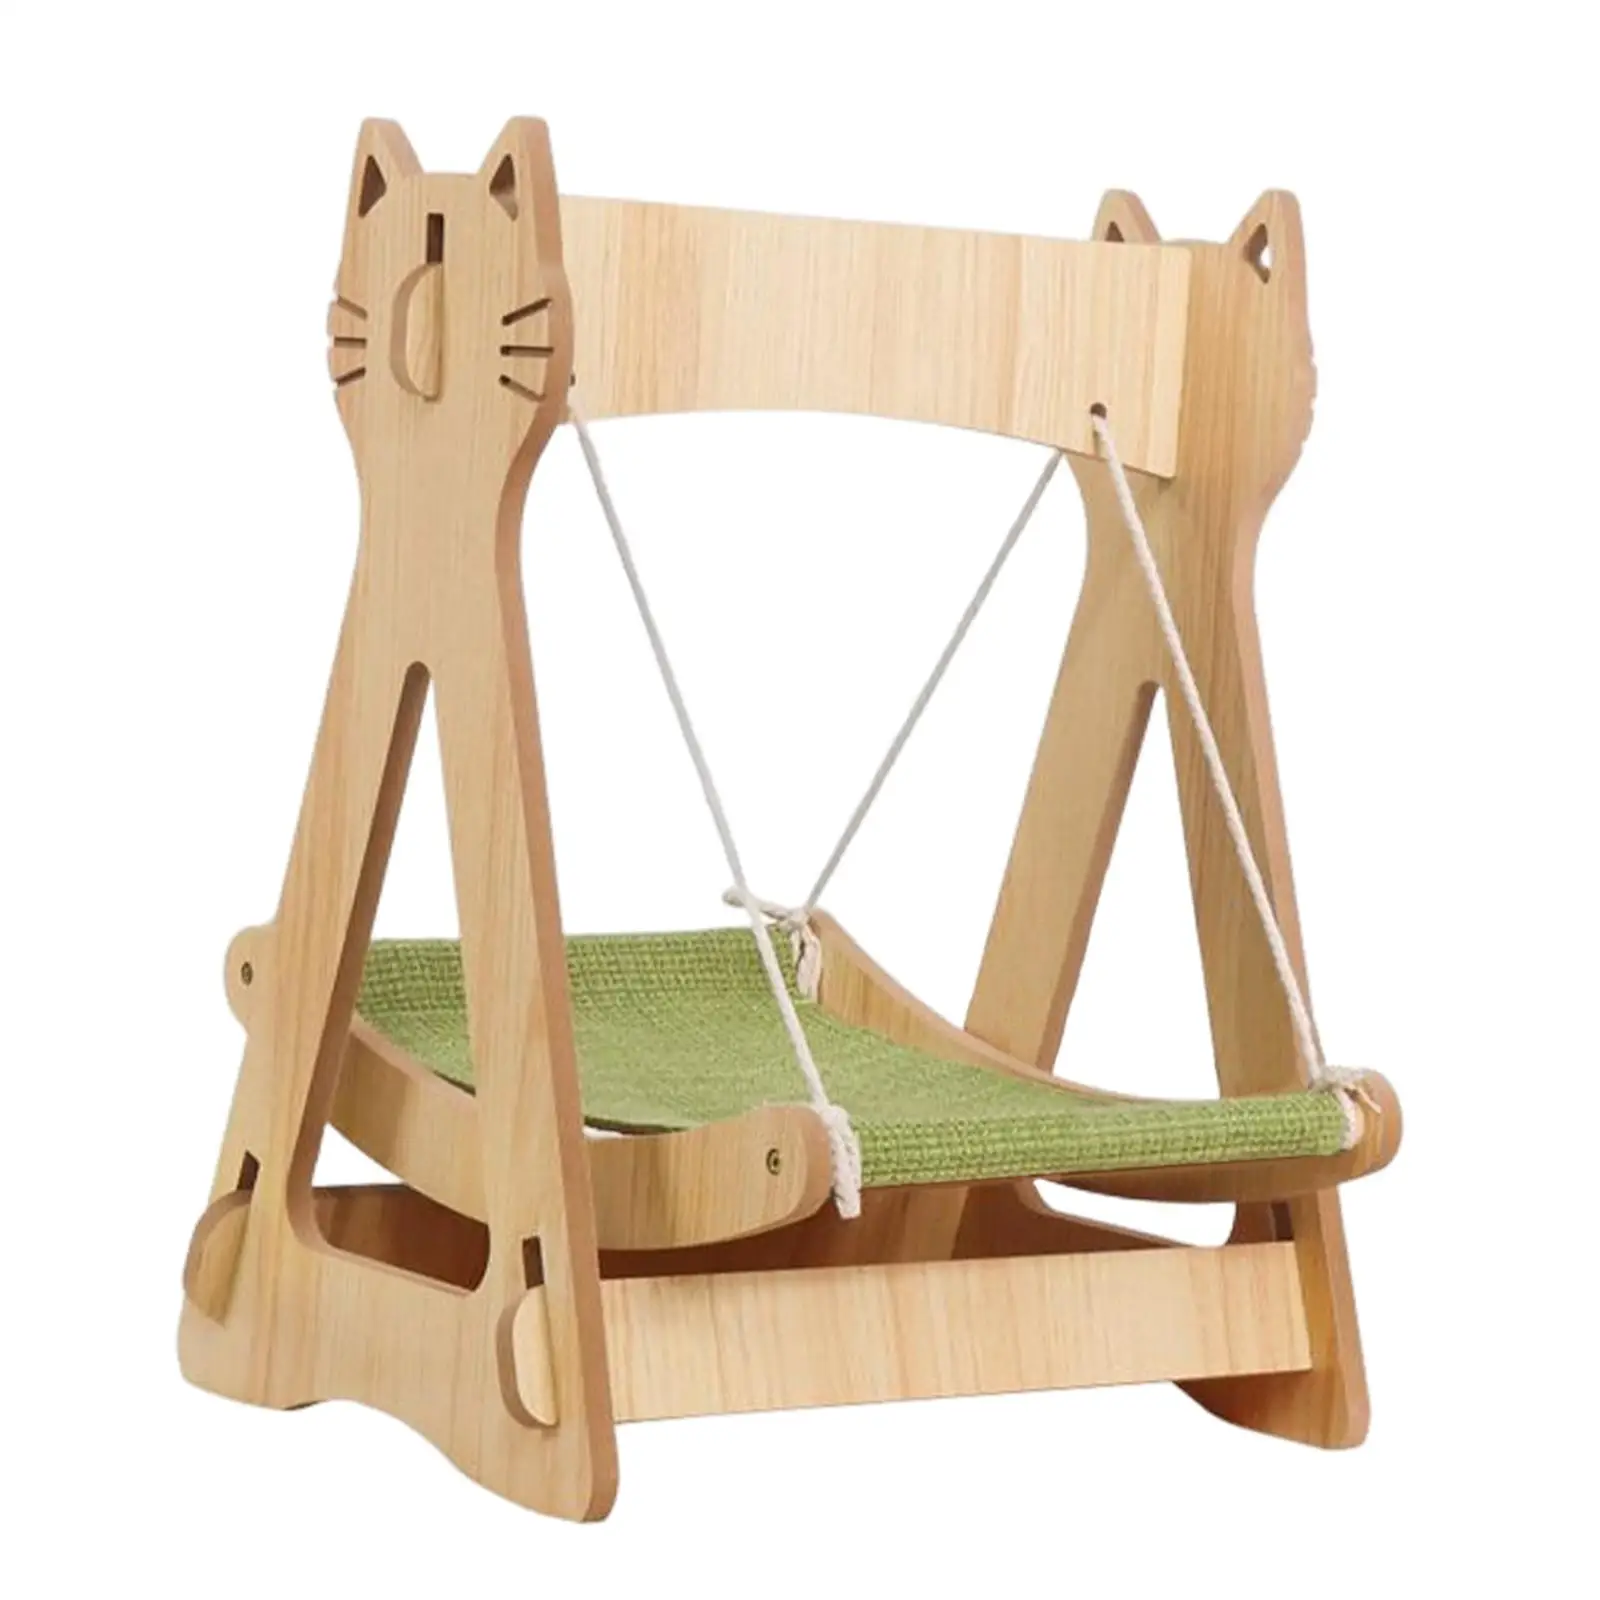 Cat Hammock Cat Bed Pet Hanging Swing Activity Toy for Cats and Small Dogs Easy